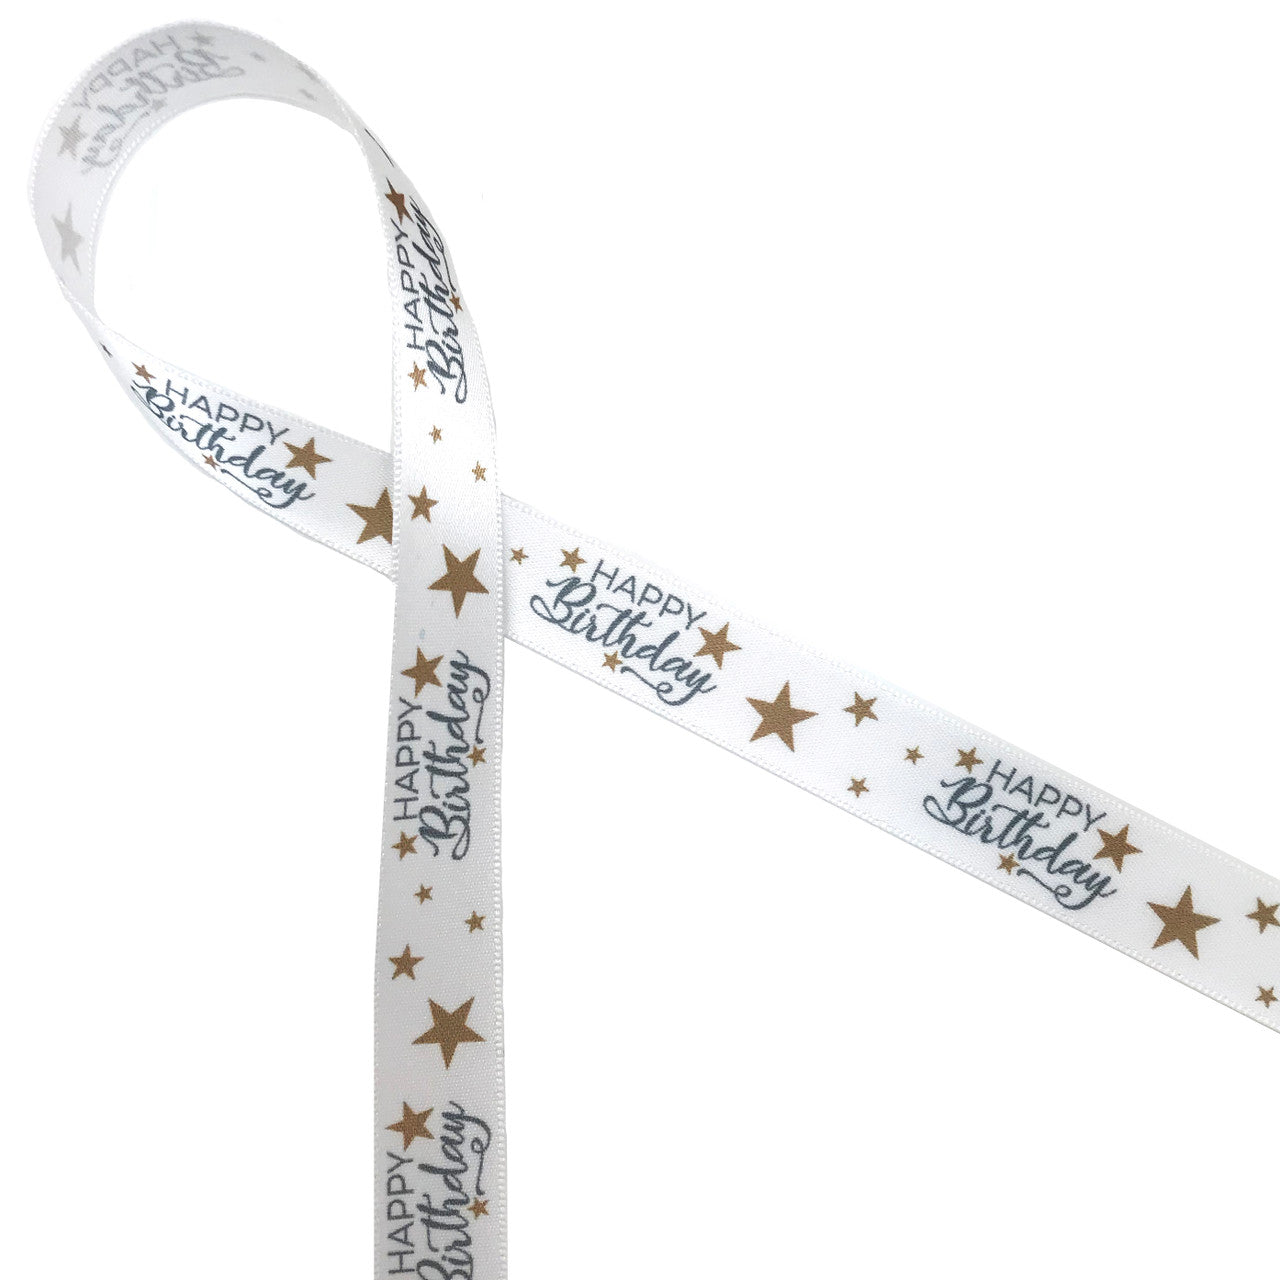 Happy Birthday ribbon printed in silver ink and gold stars on 5/8 white  single face satin